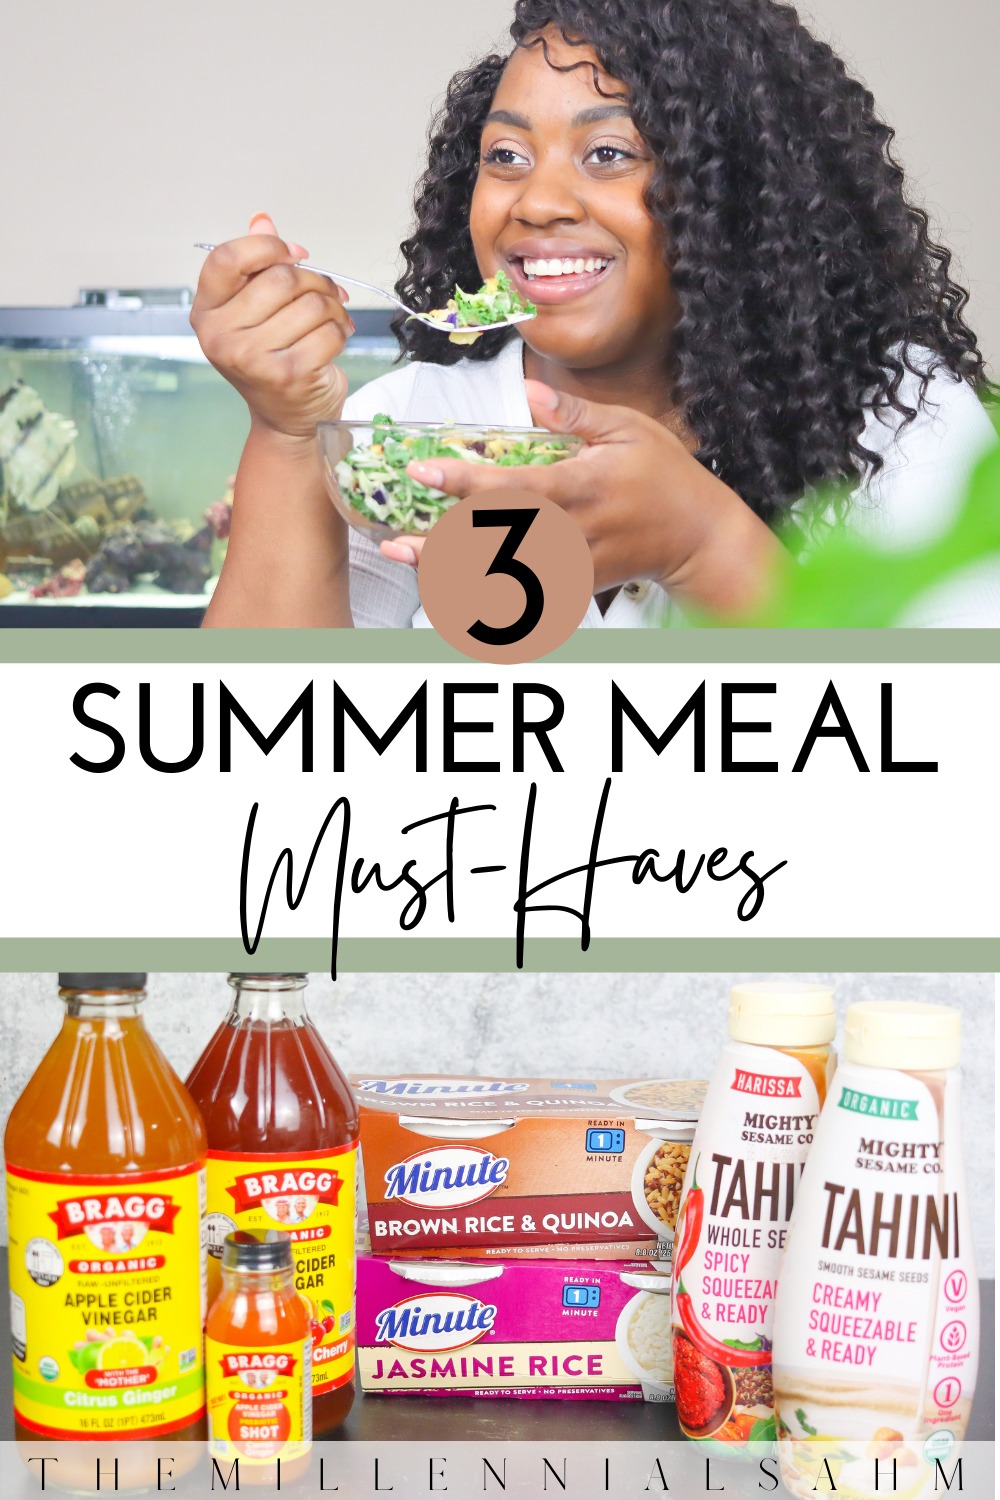 
 #ad Today I’m sharing three of my summer must-haves from @minutericeus, BRAGG, and Mighty Sesame that have helped me cut my time in the kitchen in half while continuing to eat healthy meals. #summereatsbbxx
#bragg #applecidervinegar #mightysesame #sesame #healthylifestyle #cleaneating #minuterice